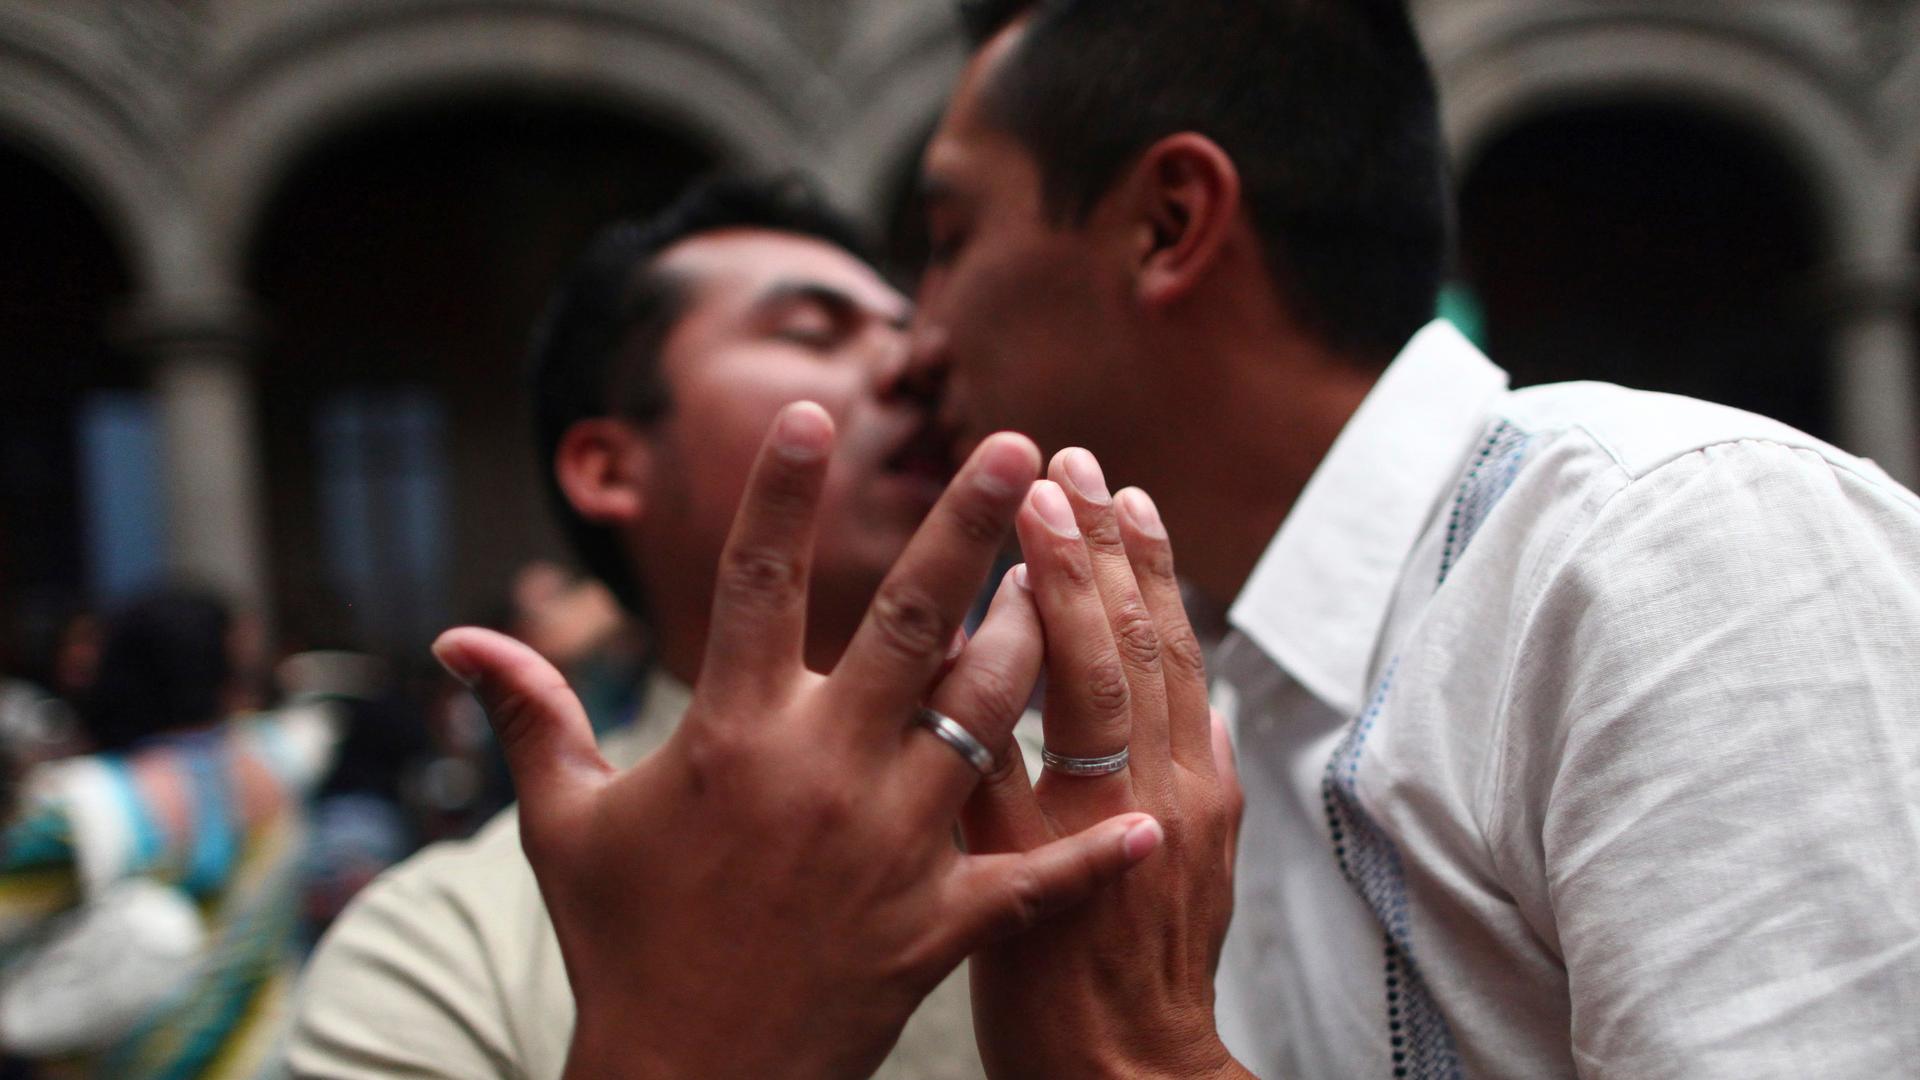 A gay couple kisses as they display their rings during a mass wedding in Mexico City on March 21, 2014. The ceremony commemorated the fourth anniversary of Mexico's legalization of same-sex marriage.